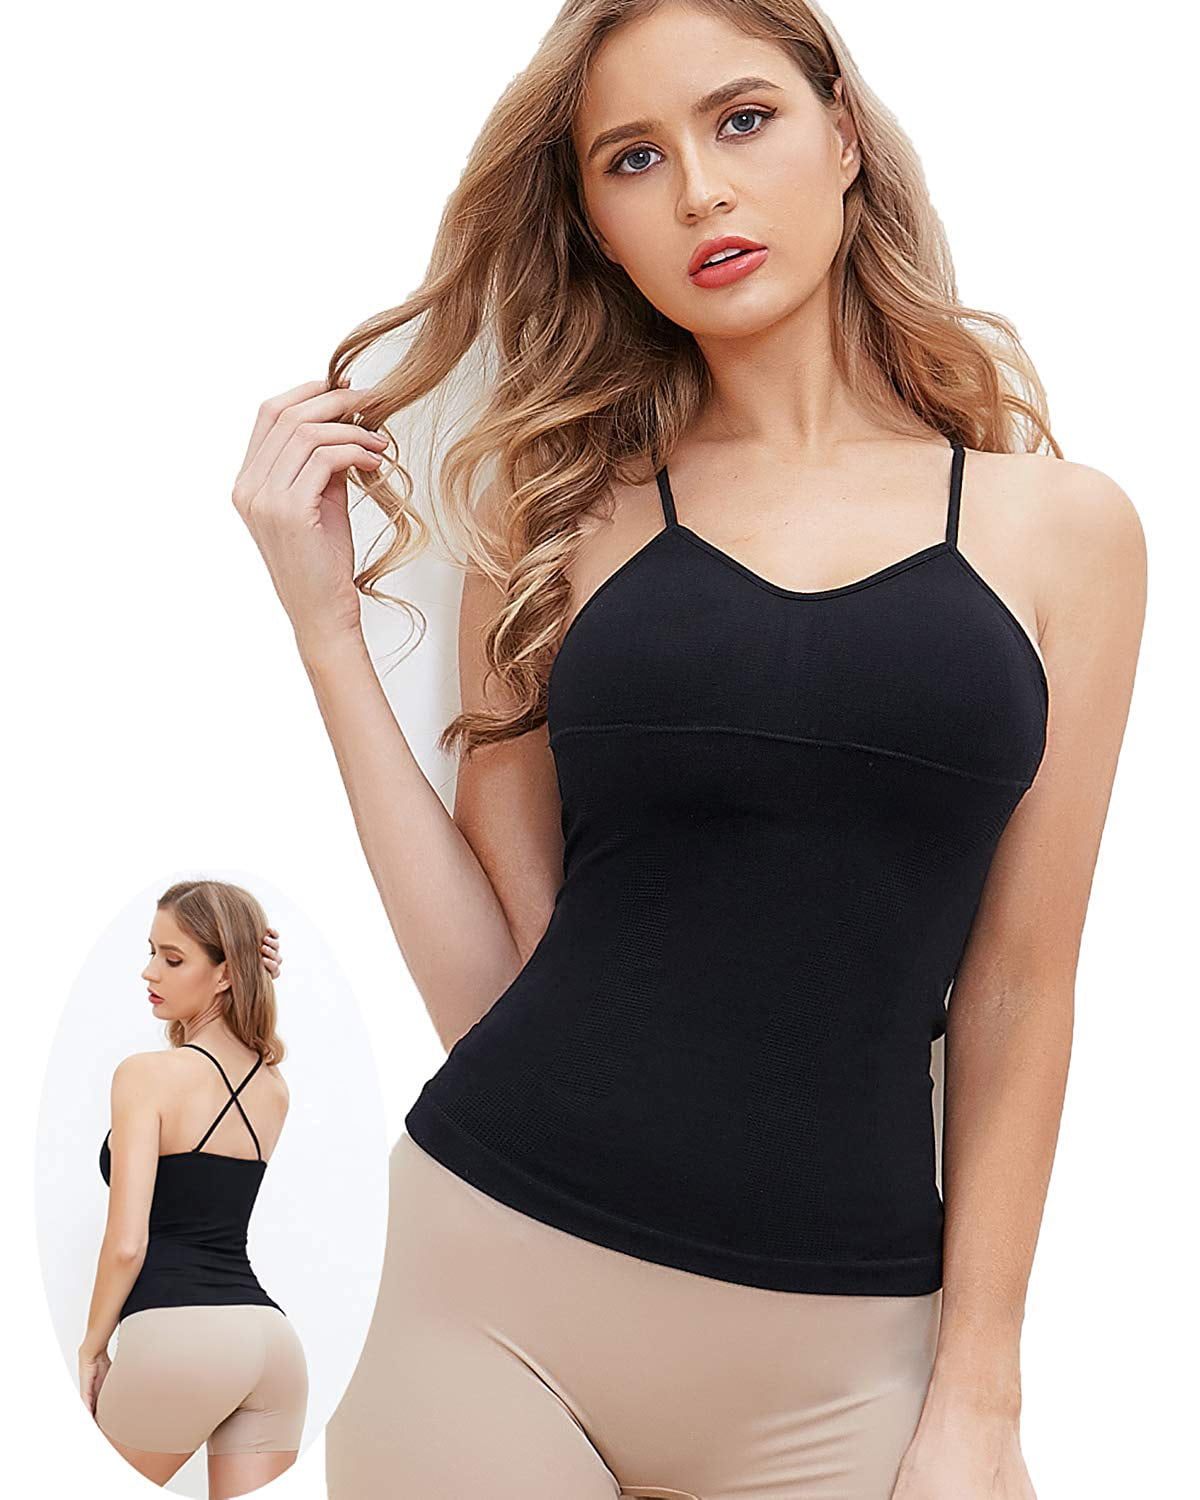 SLIMBELLE Shapewear Tank Top Cami Shaper with Built-in Removable Bra Pads Tummy Control Camisole Body Shaper for Women 